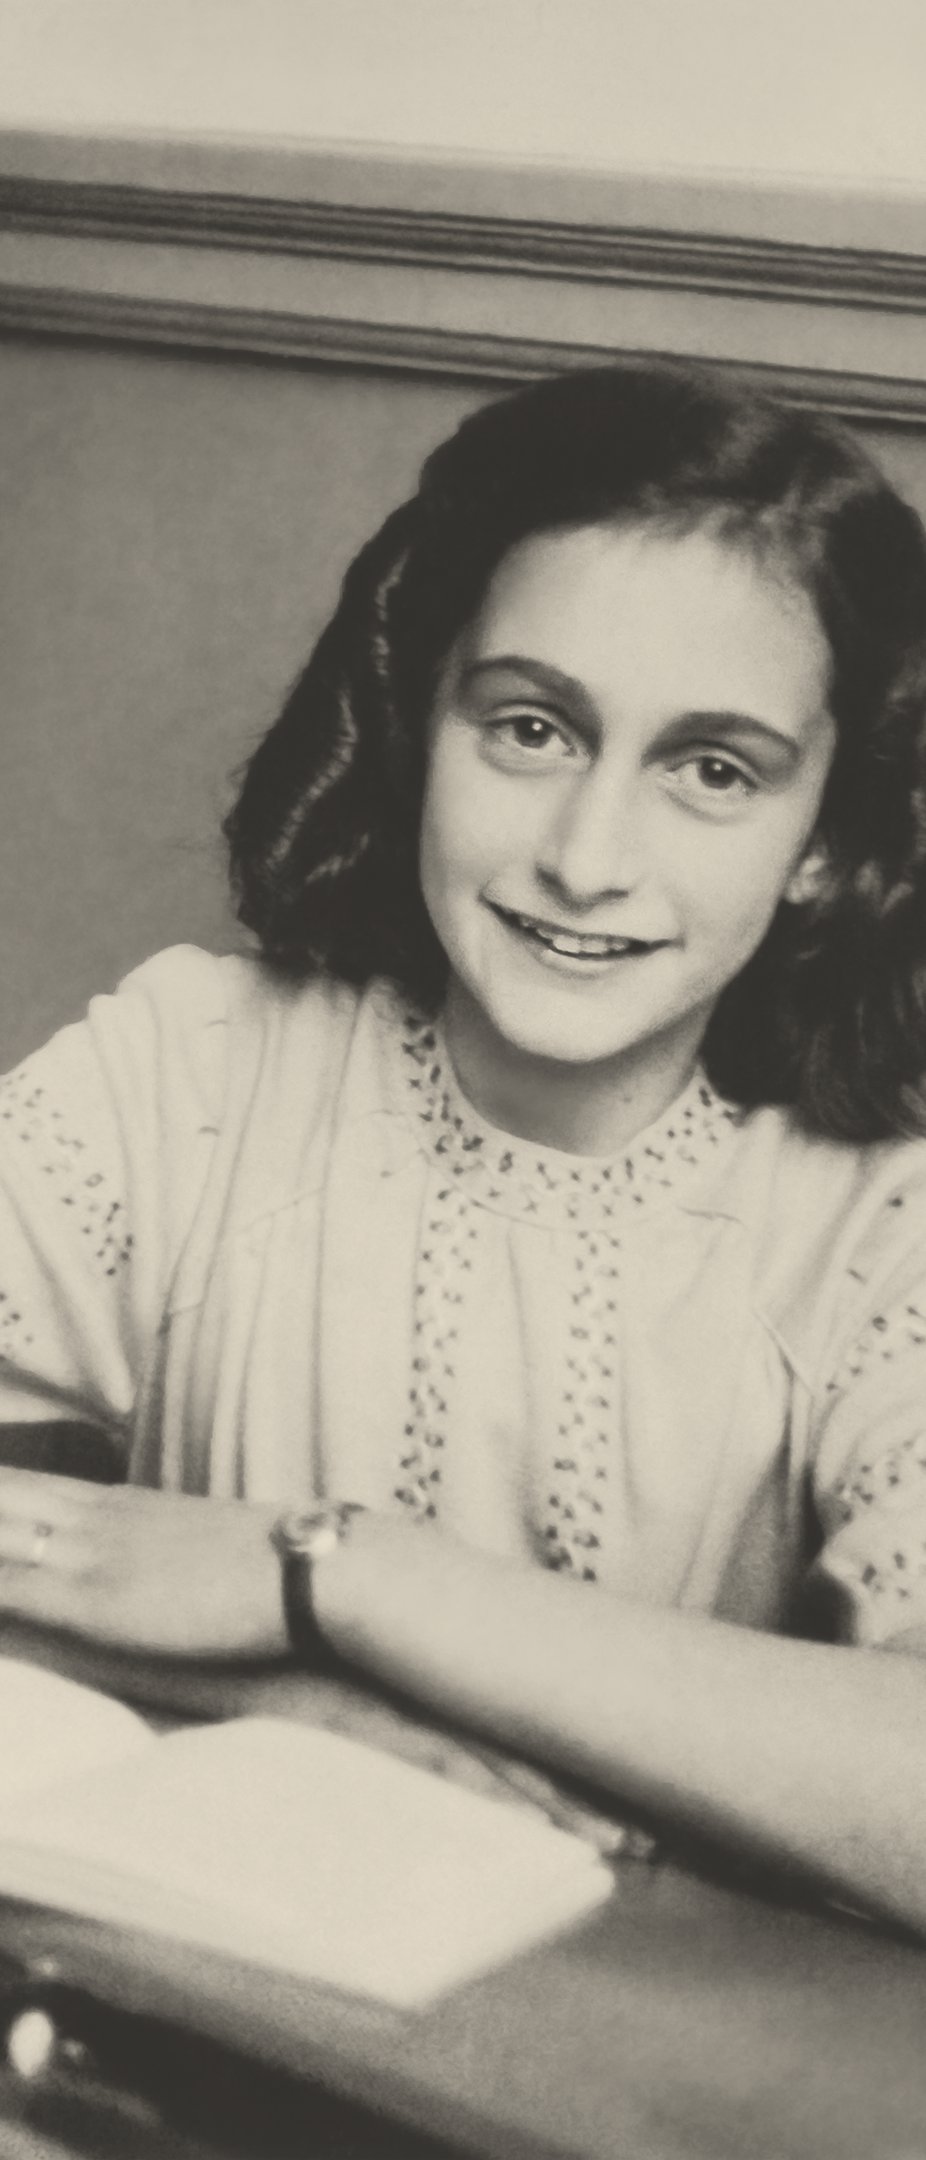 An image of Anne Frank